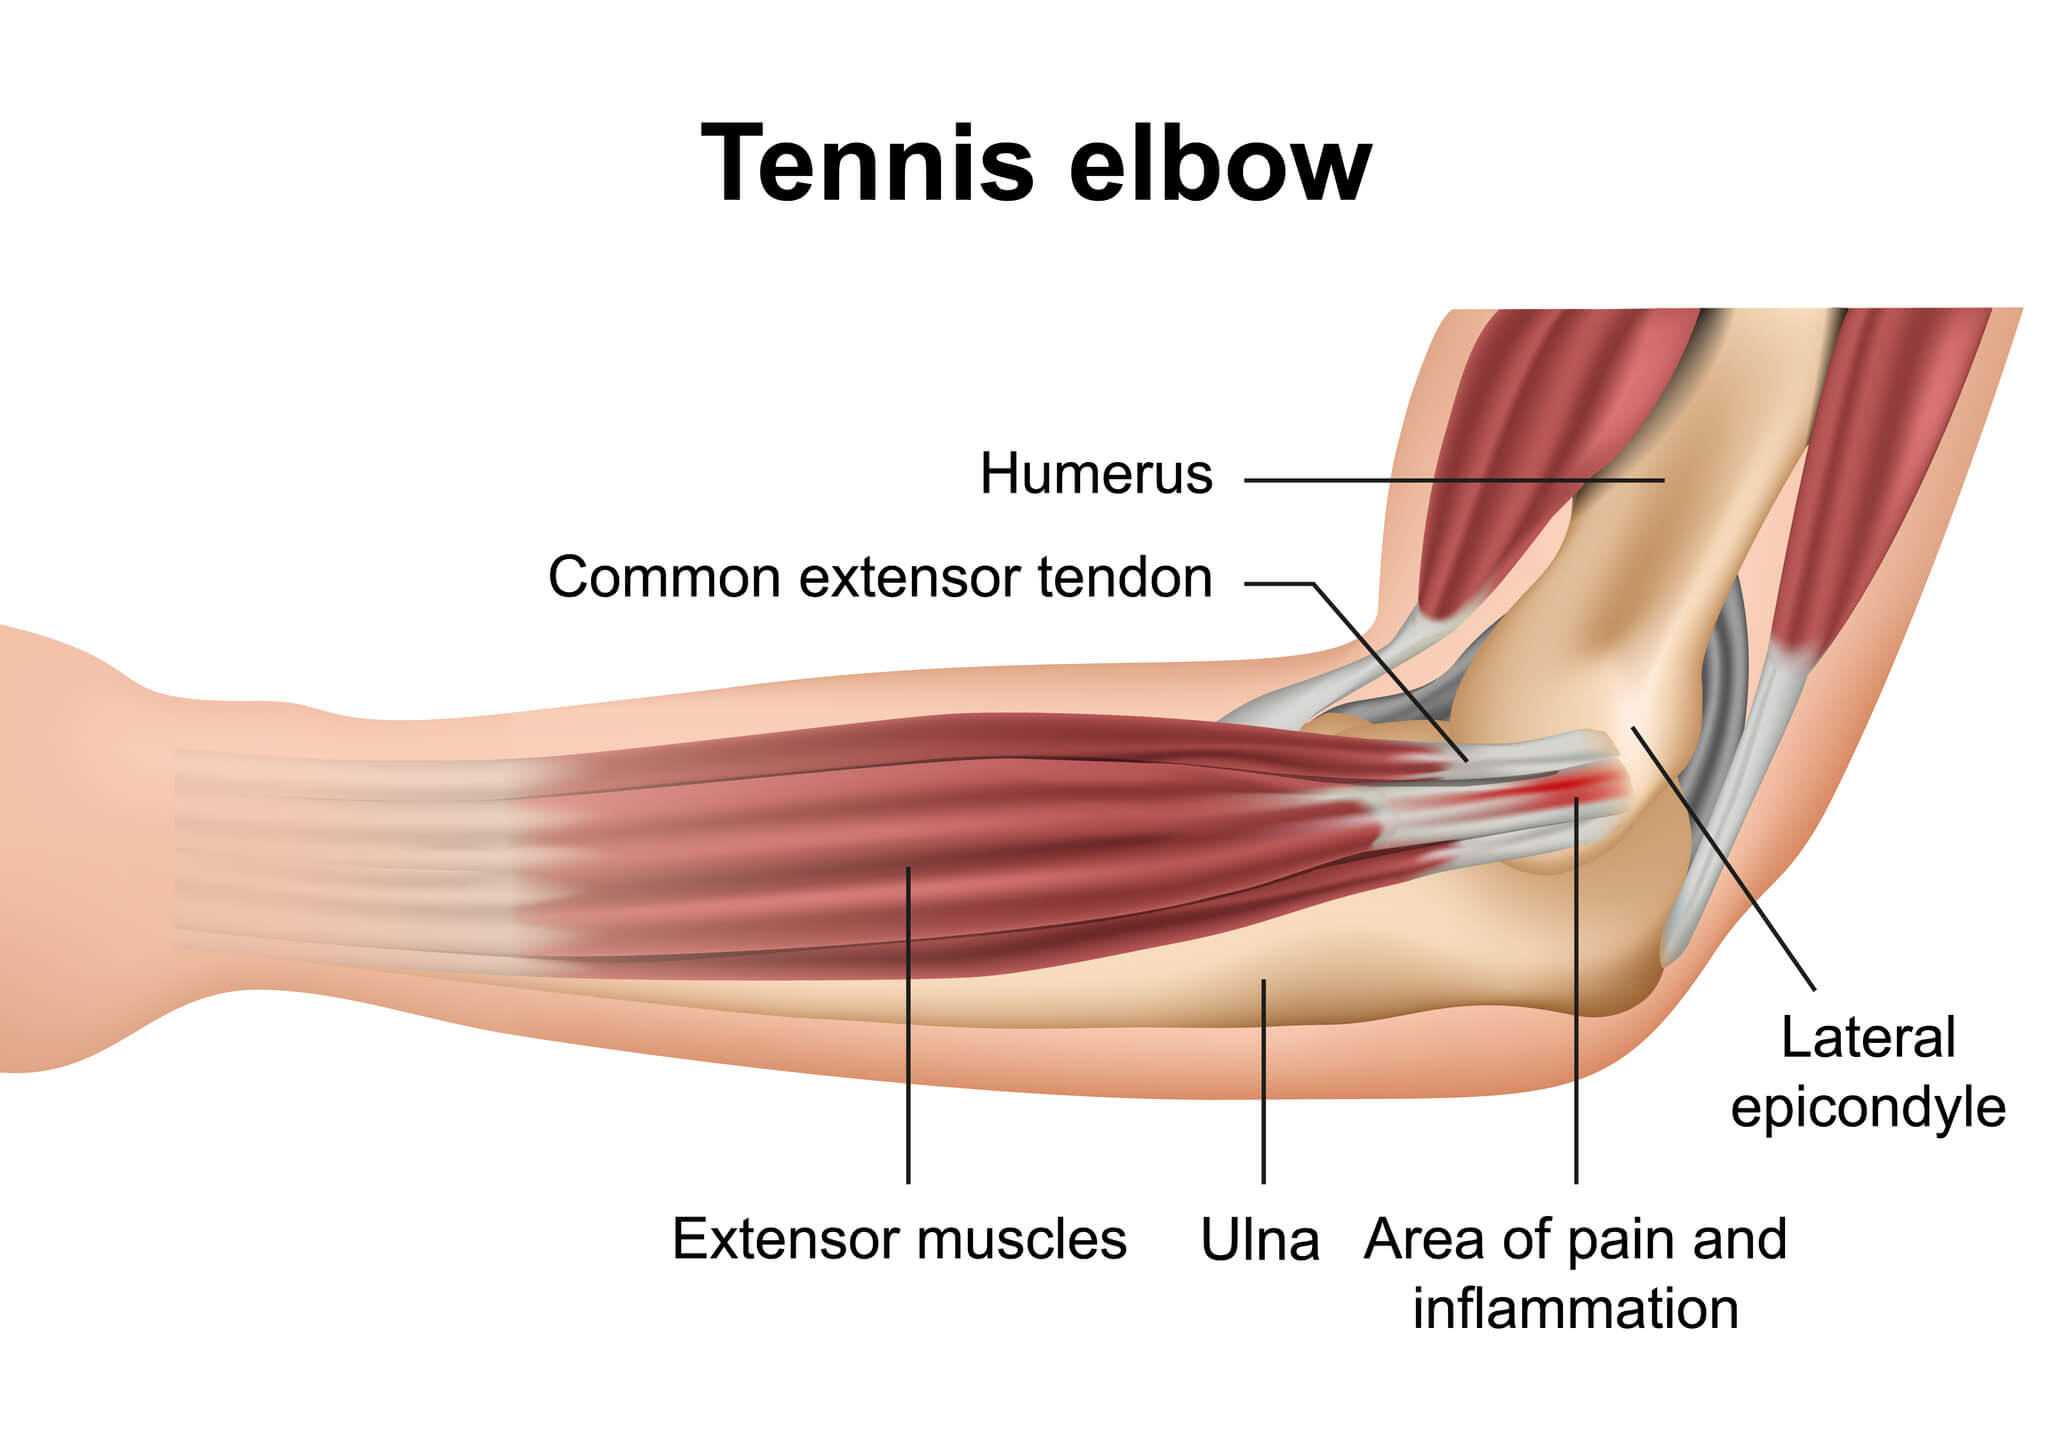 Image showing the pathology of tennis elbow